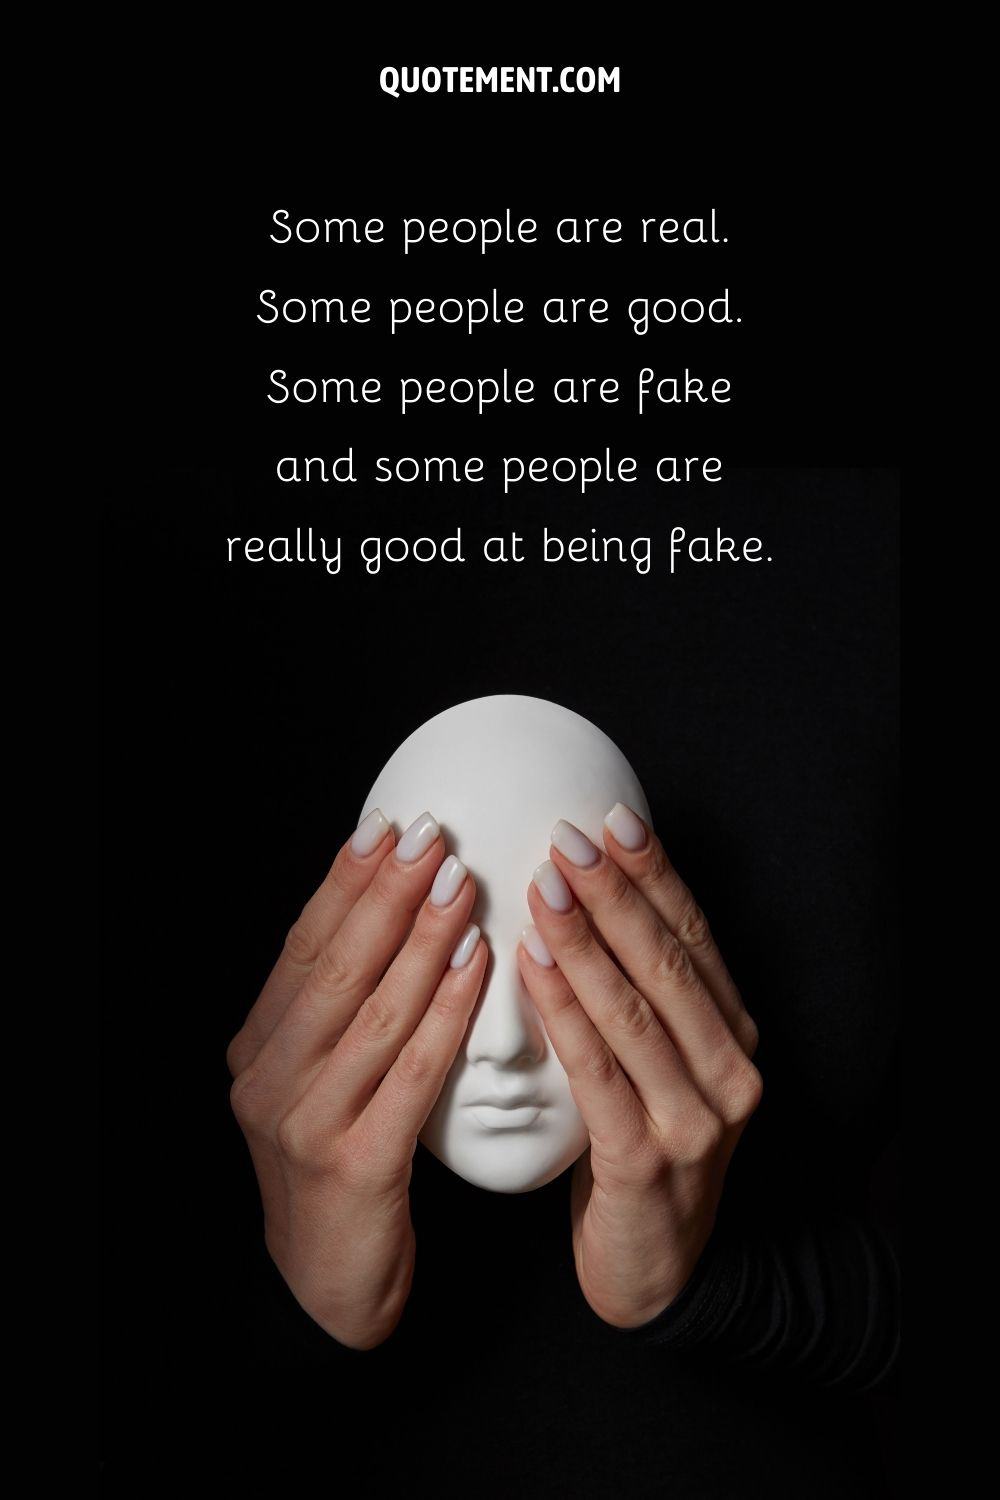 Some people are fake and some people are really good at being fake.